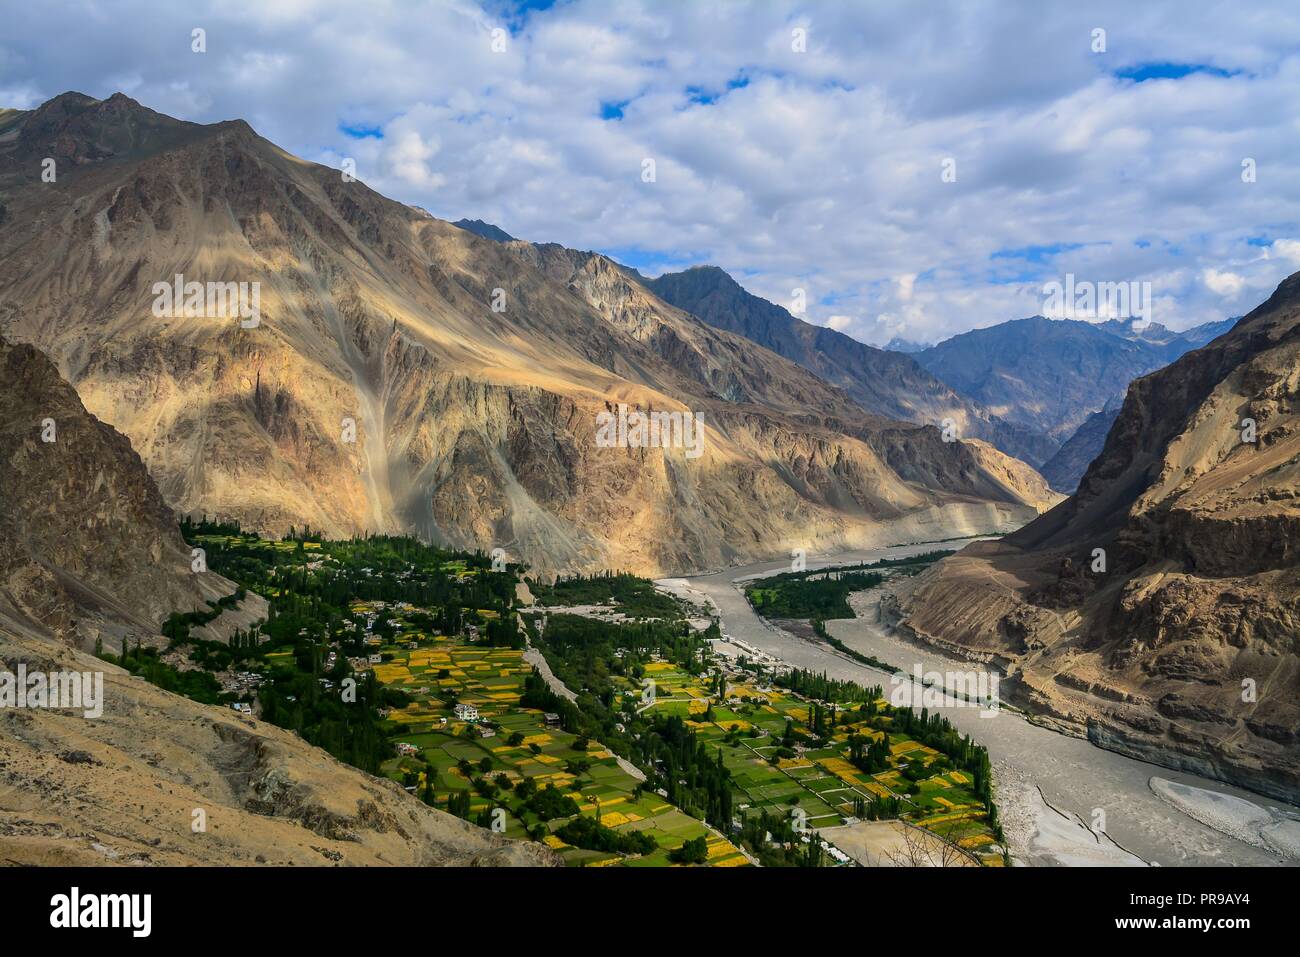 Turtuk is a village in north-eastern part of Ladakh in Jammu and Kashmir, India. It is sandwiched between the Himalaya and Karakoram mountain ranges. Stock Photo